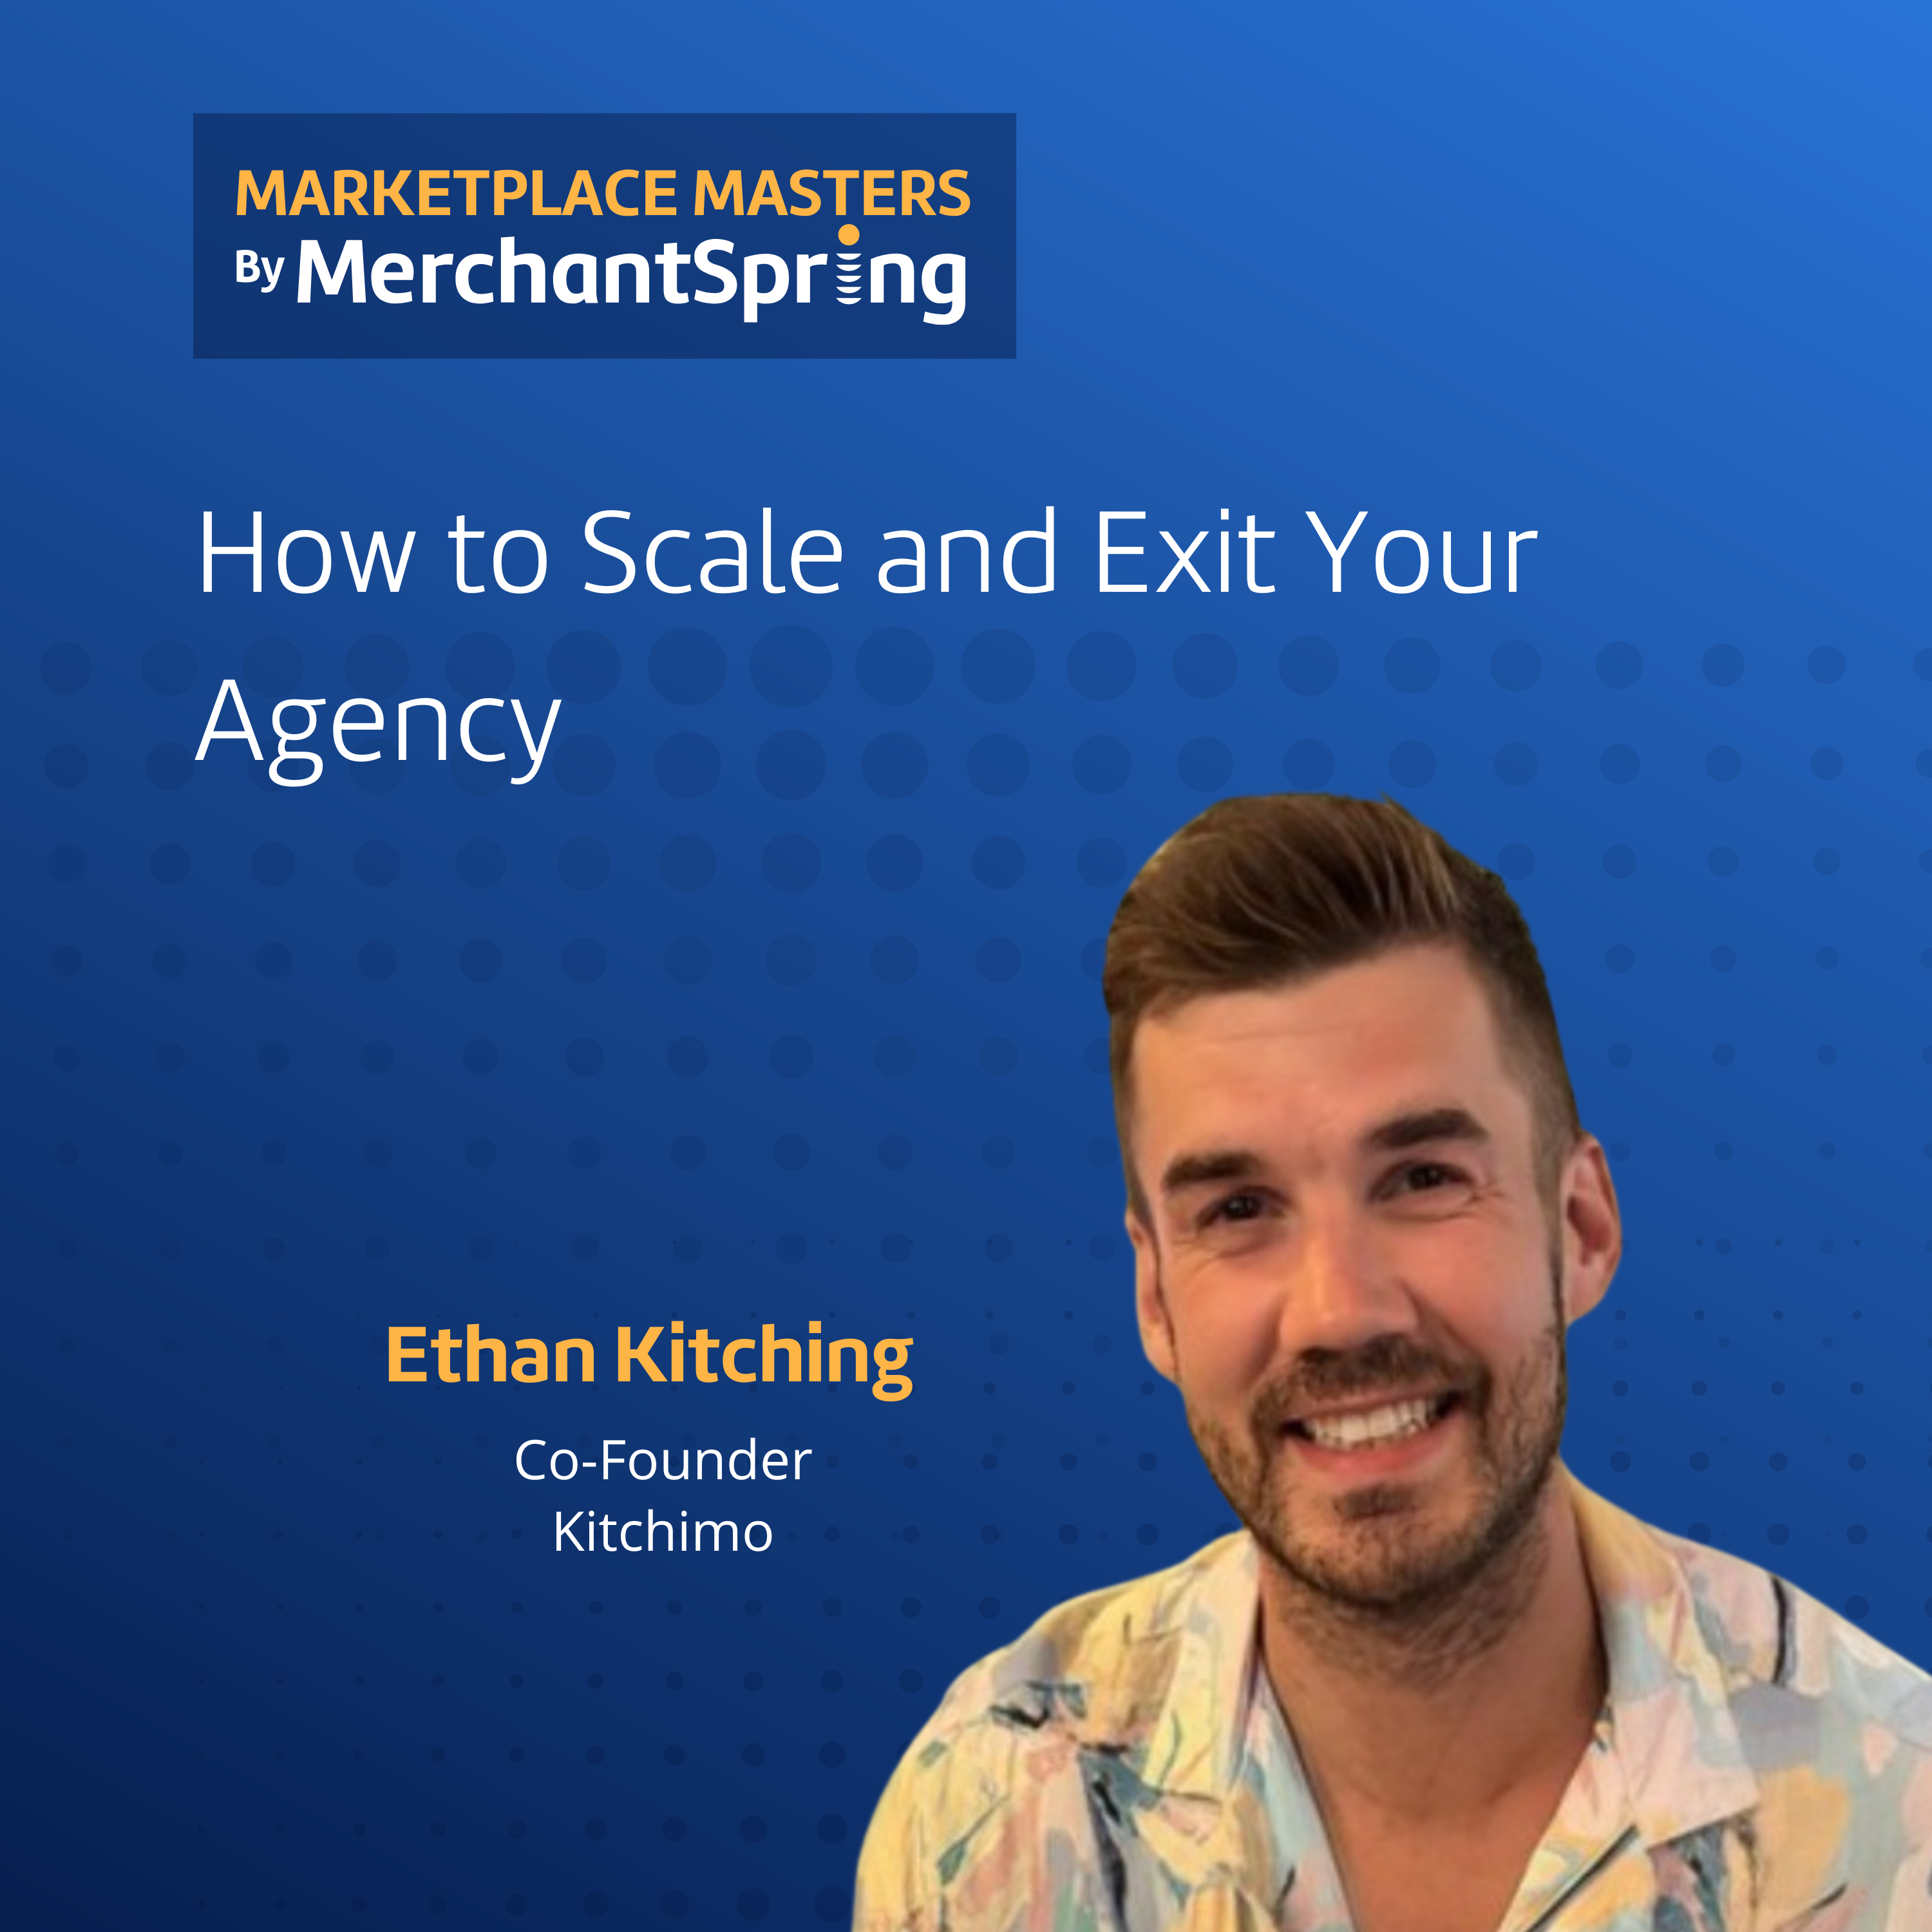 How to Scale and Exit Your Agency